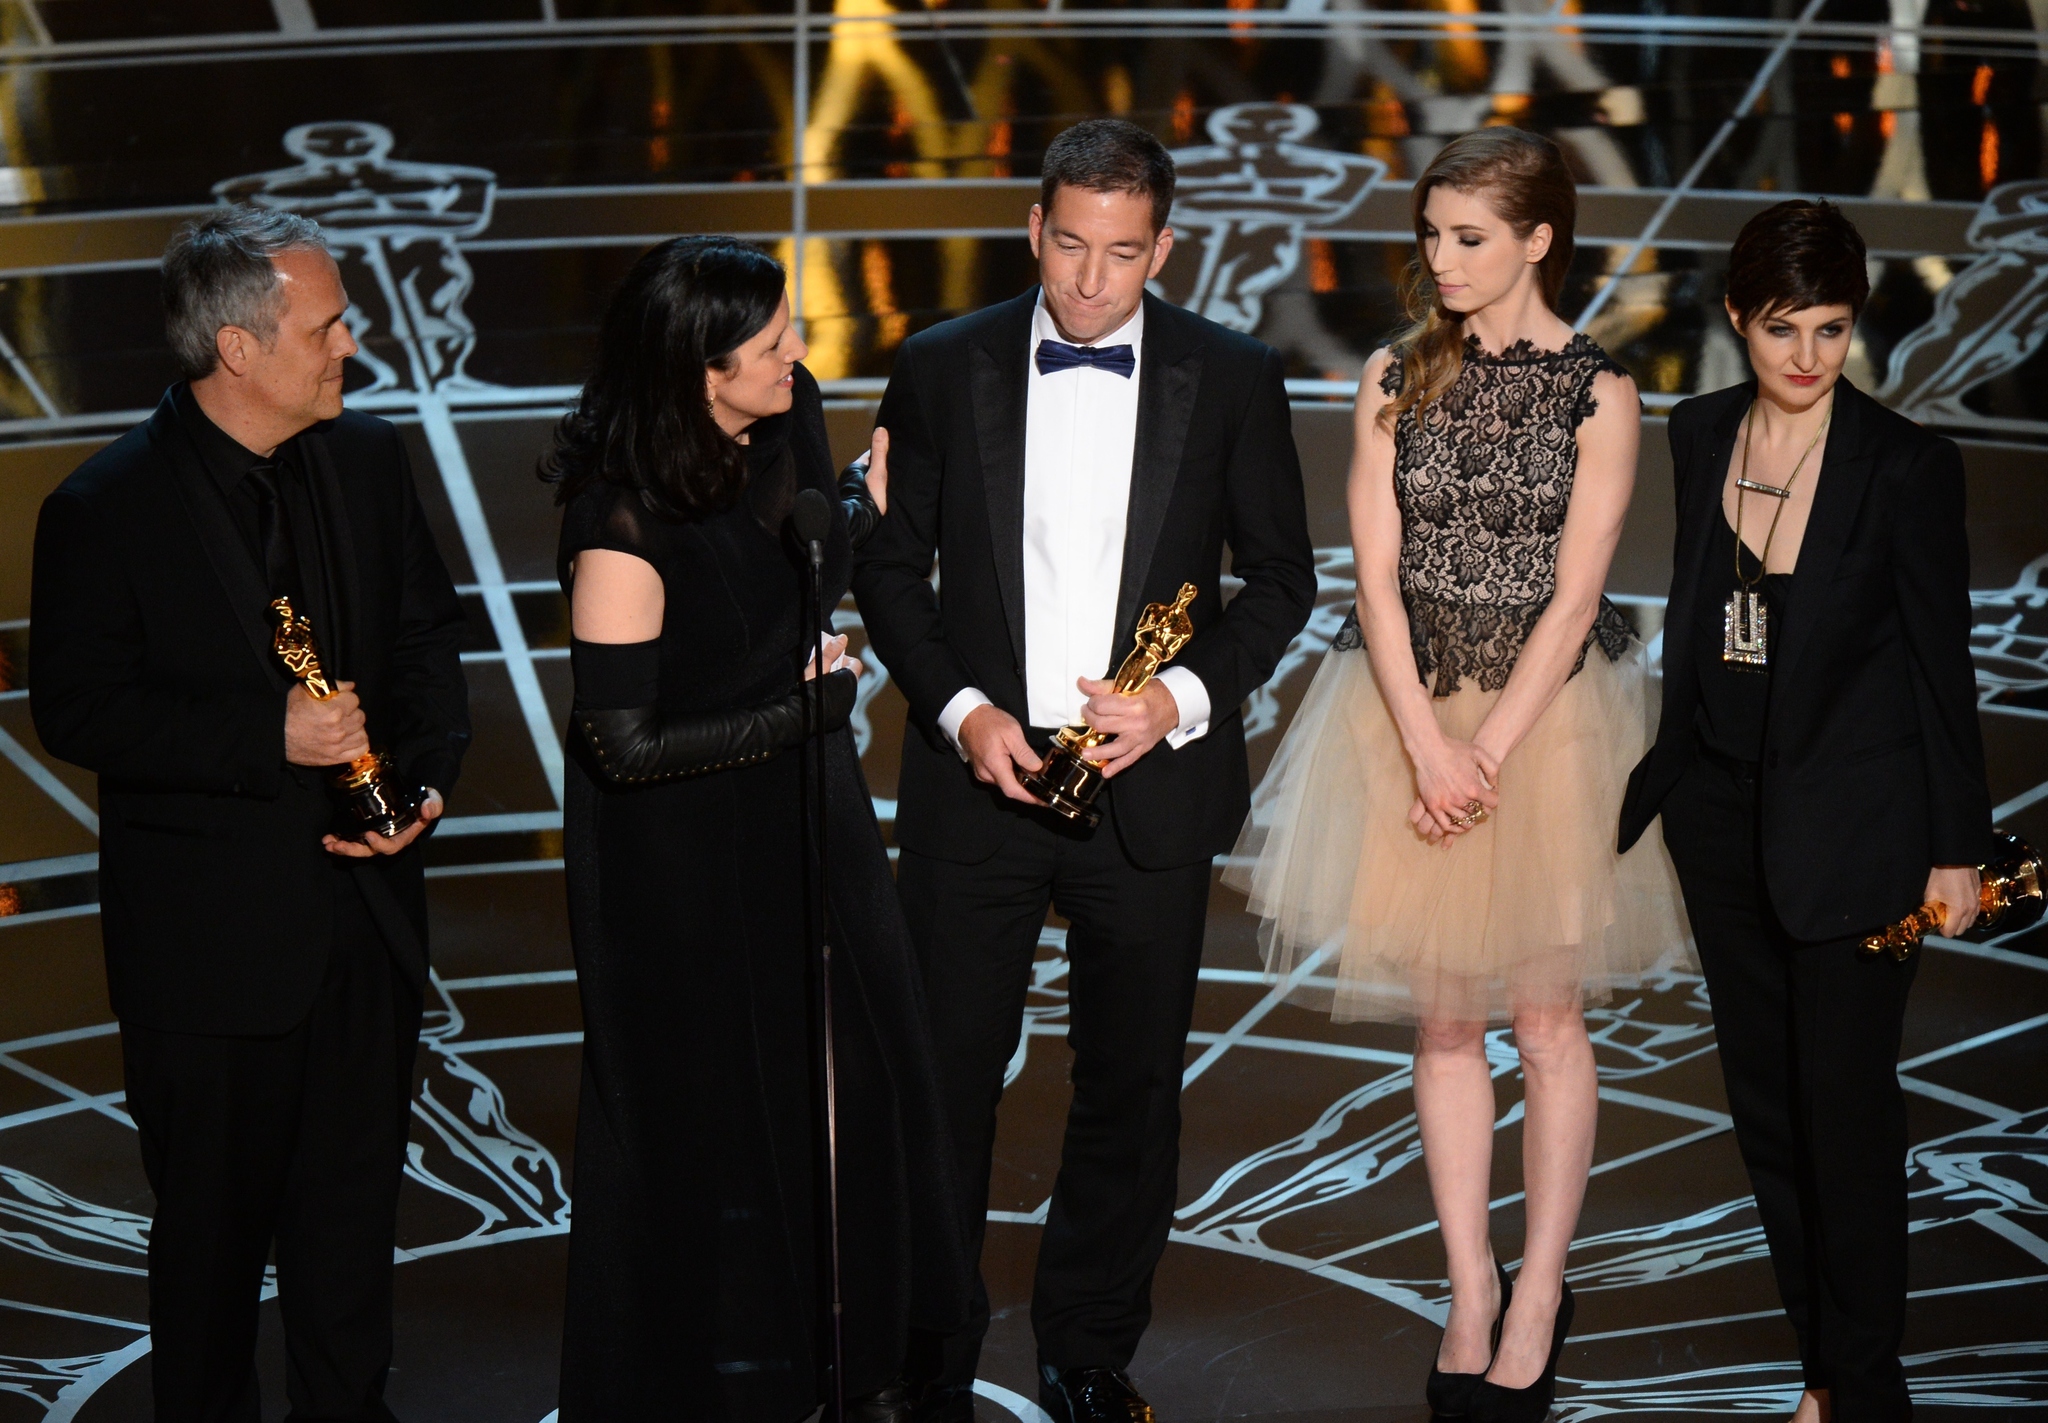 Mathilde Bonnefoy, Laura Poitras, Dirk Wilutzky and Glenn Greenwald at event of The Oscars (2015)